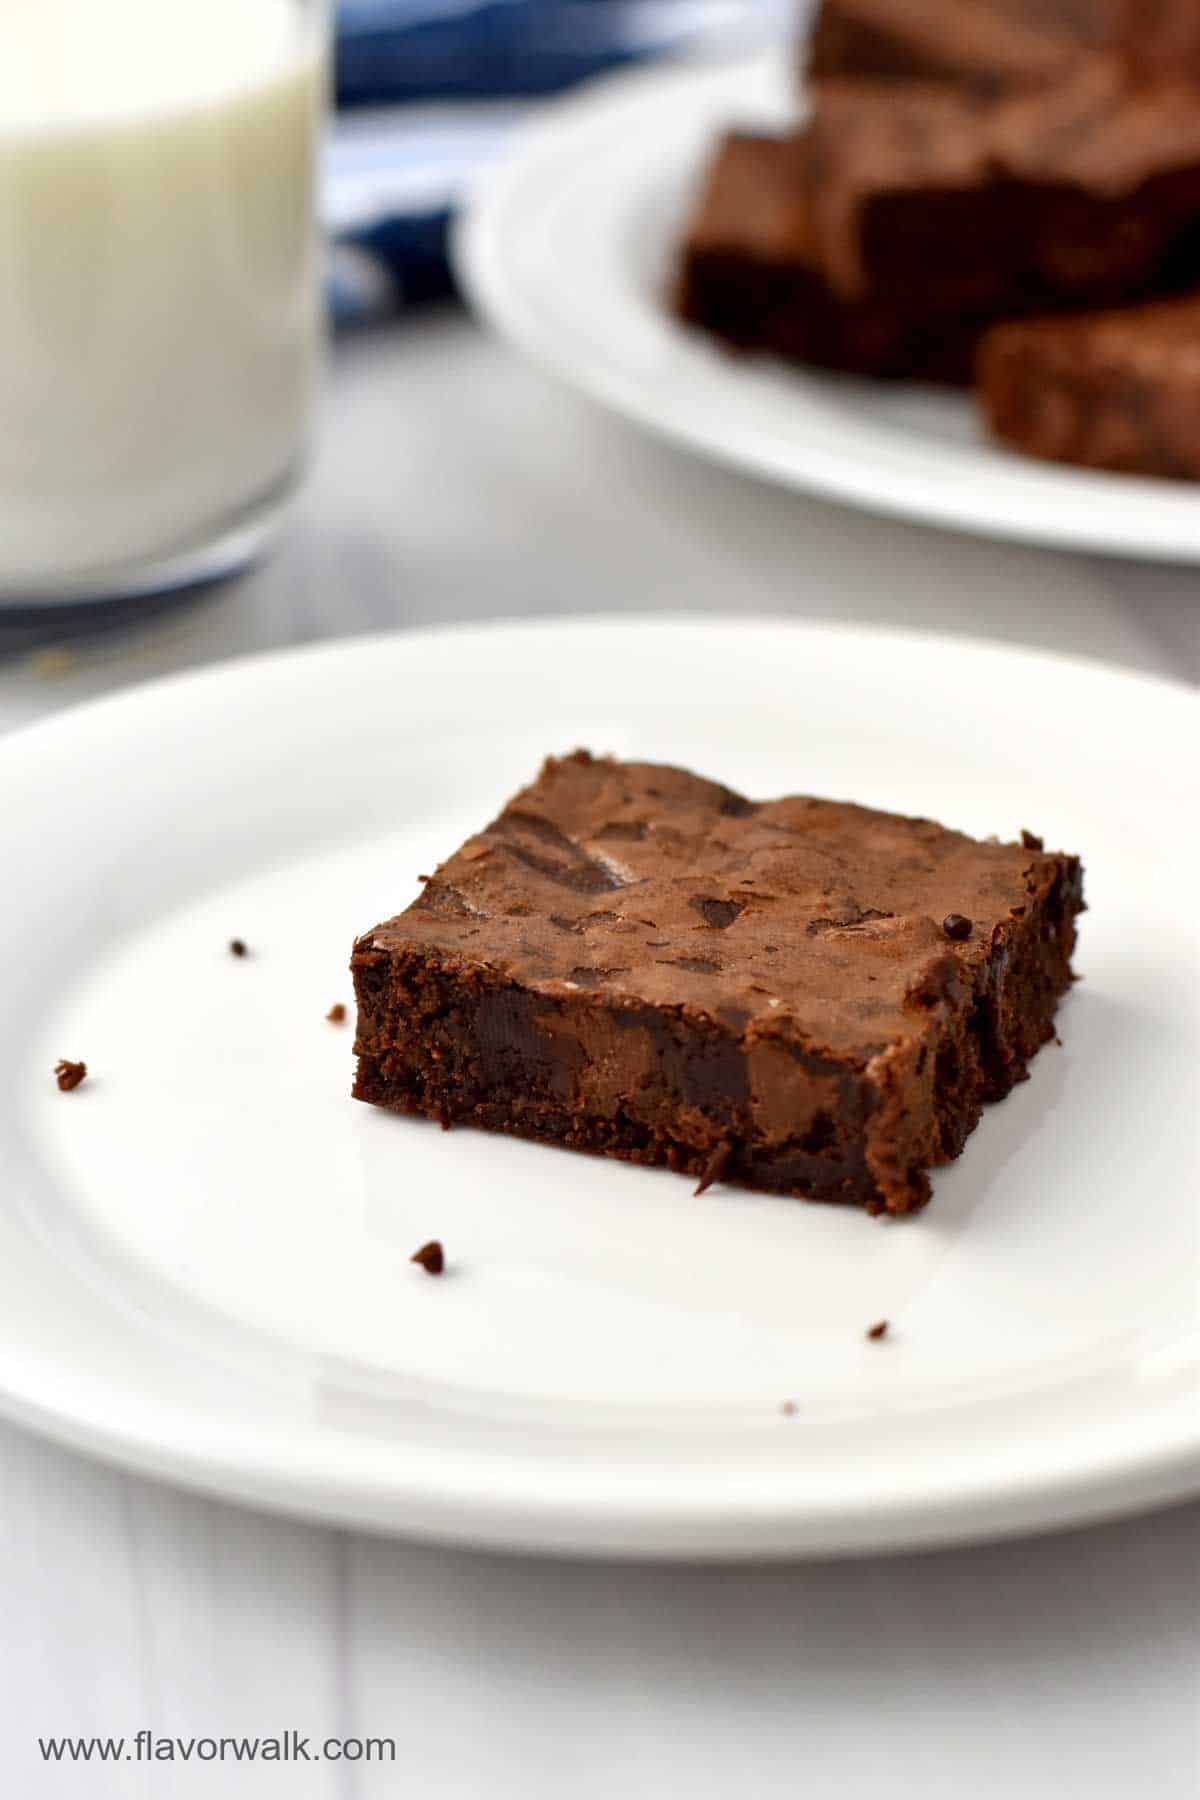 One brownie on a small white plate with a glass of milk and more brownies in the background.